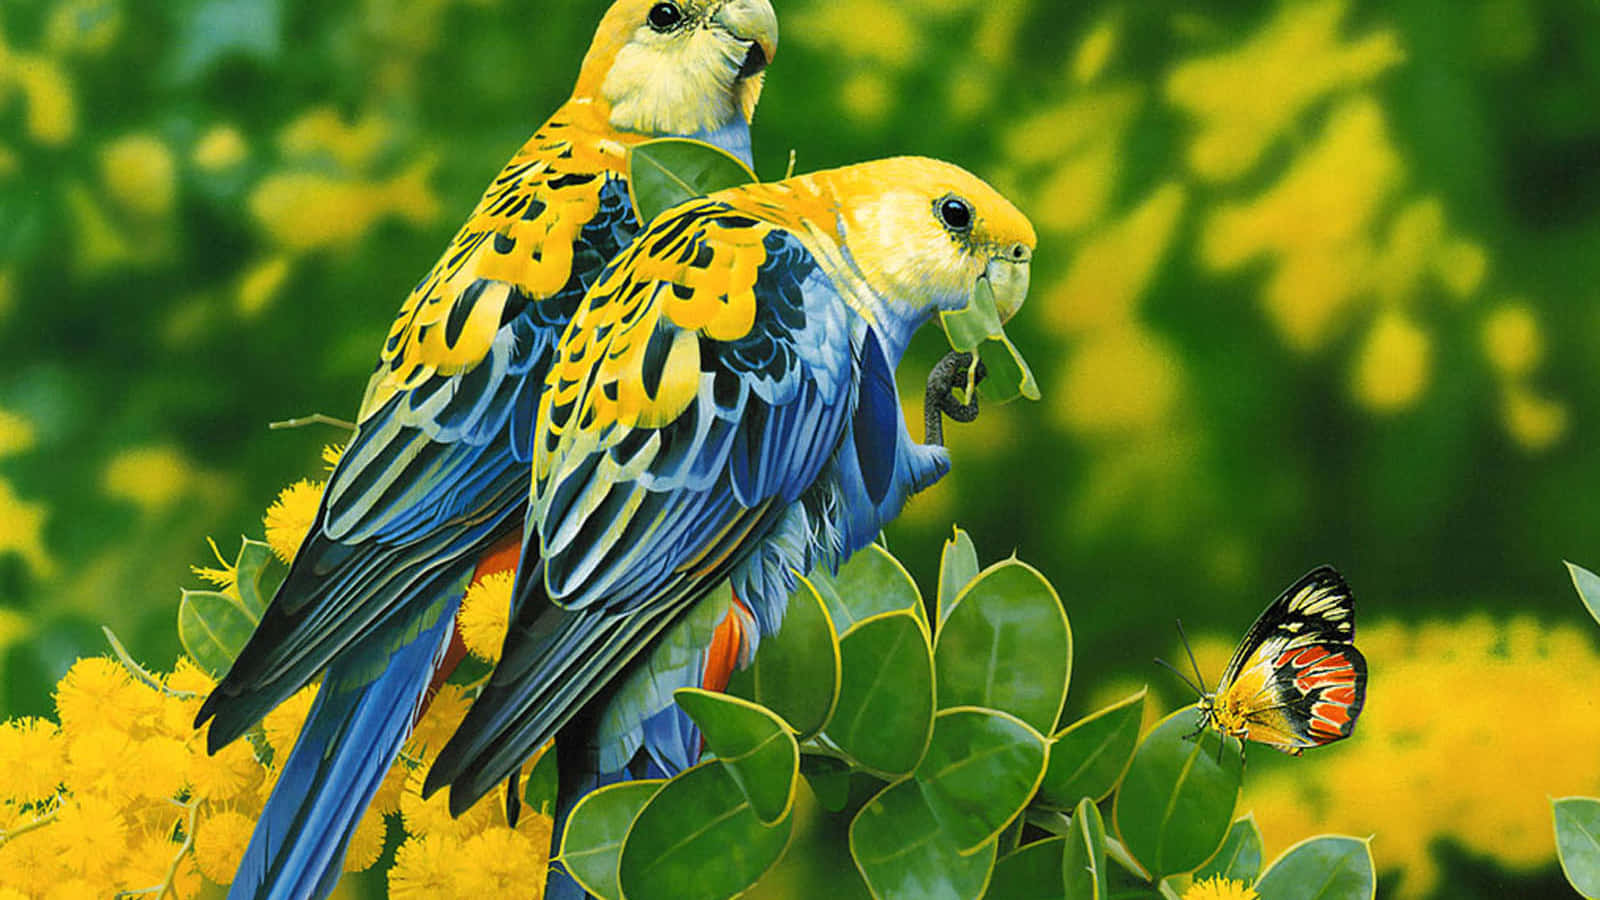 Cute Lovebirds On Leaves Picture